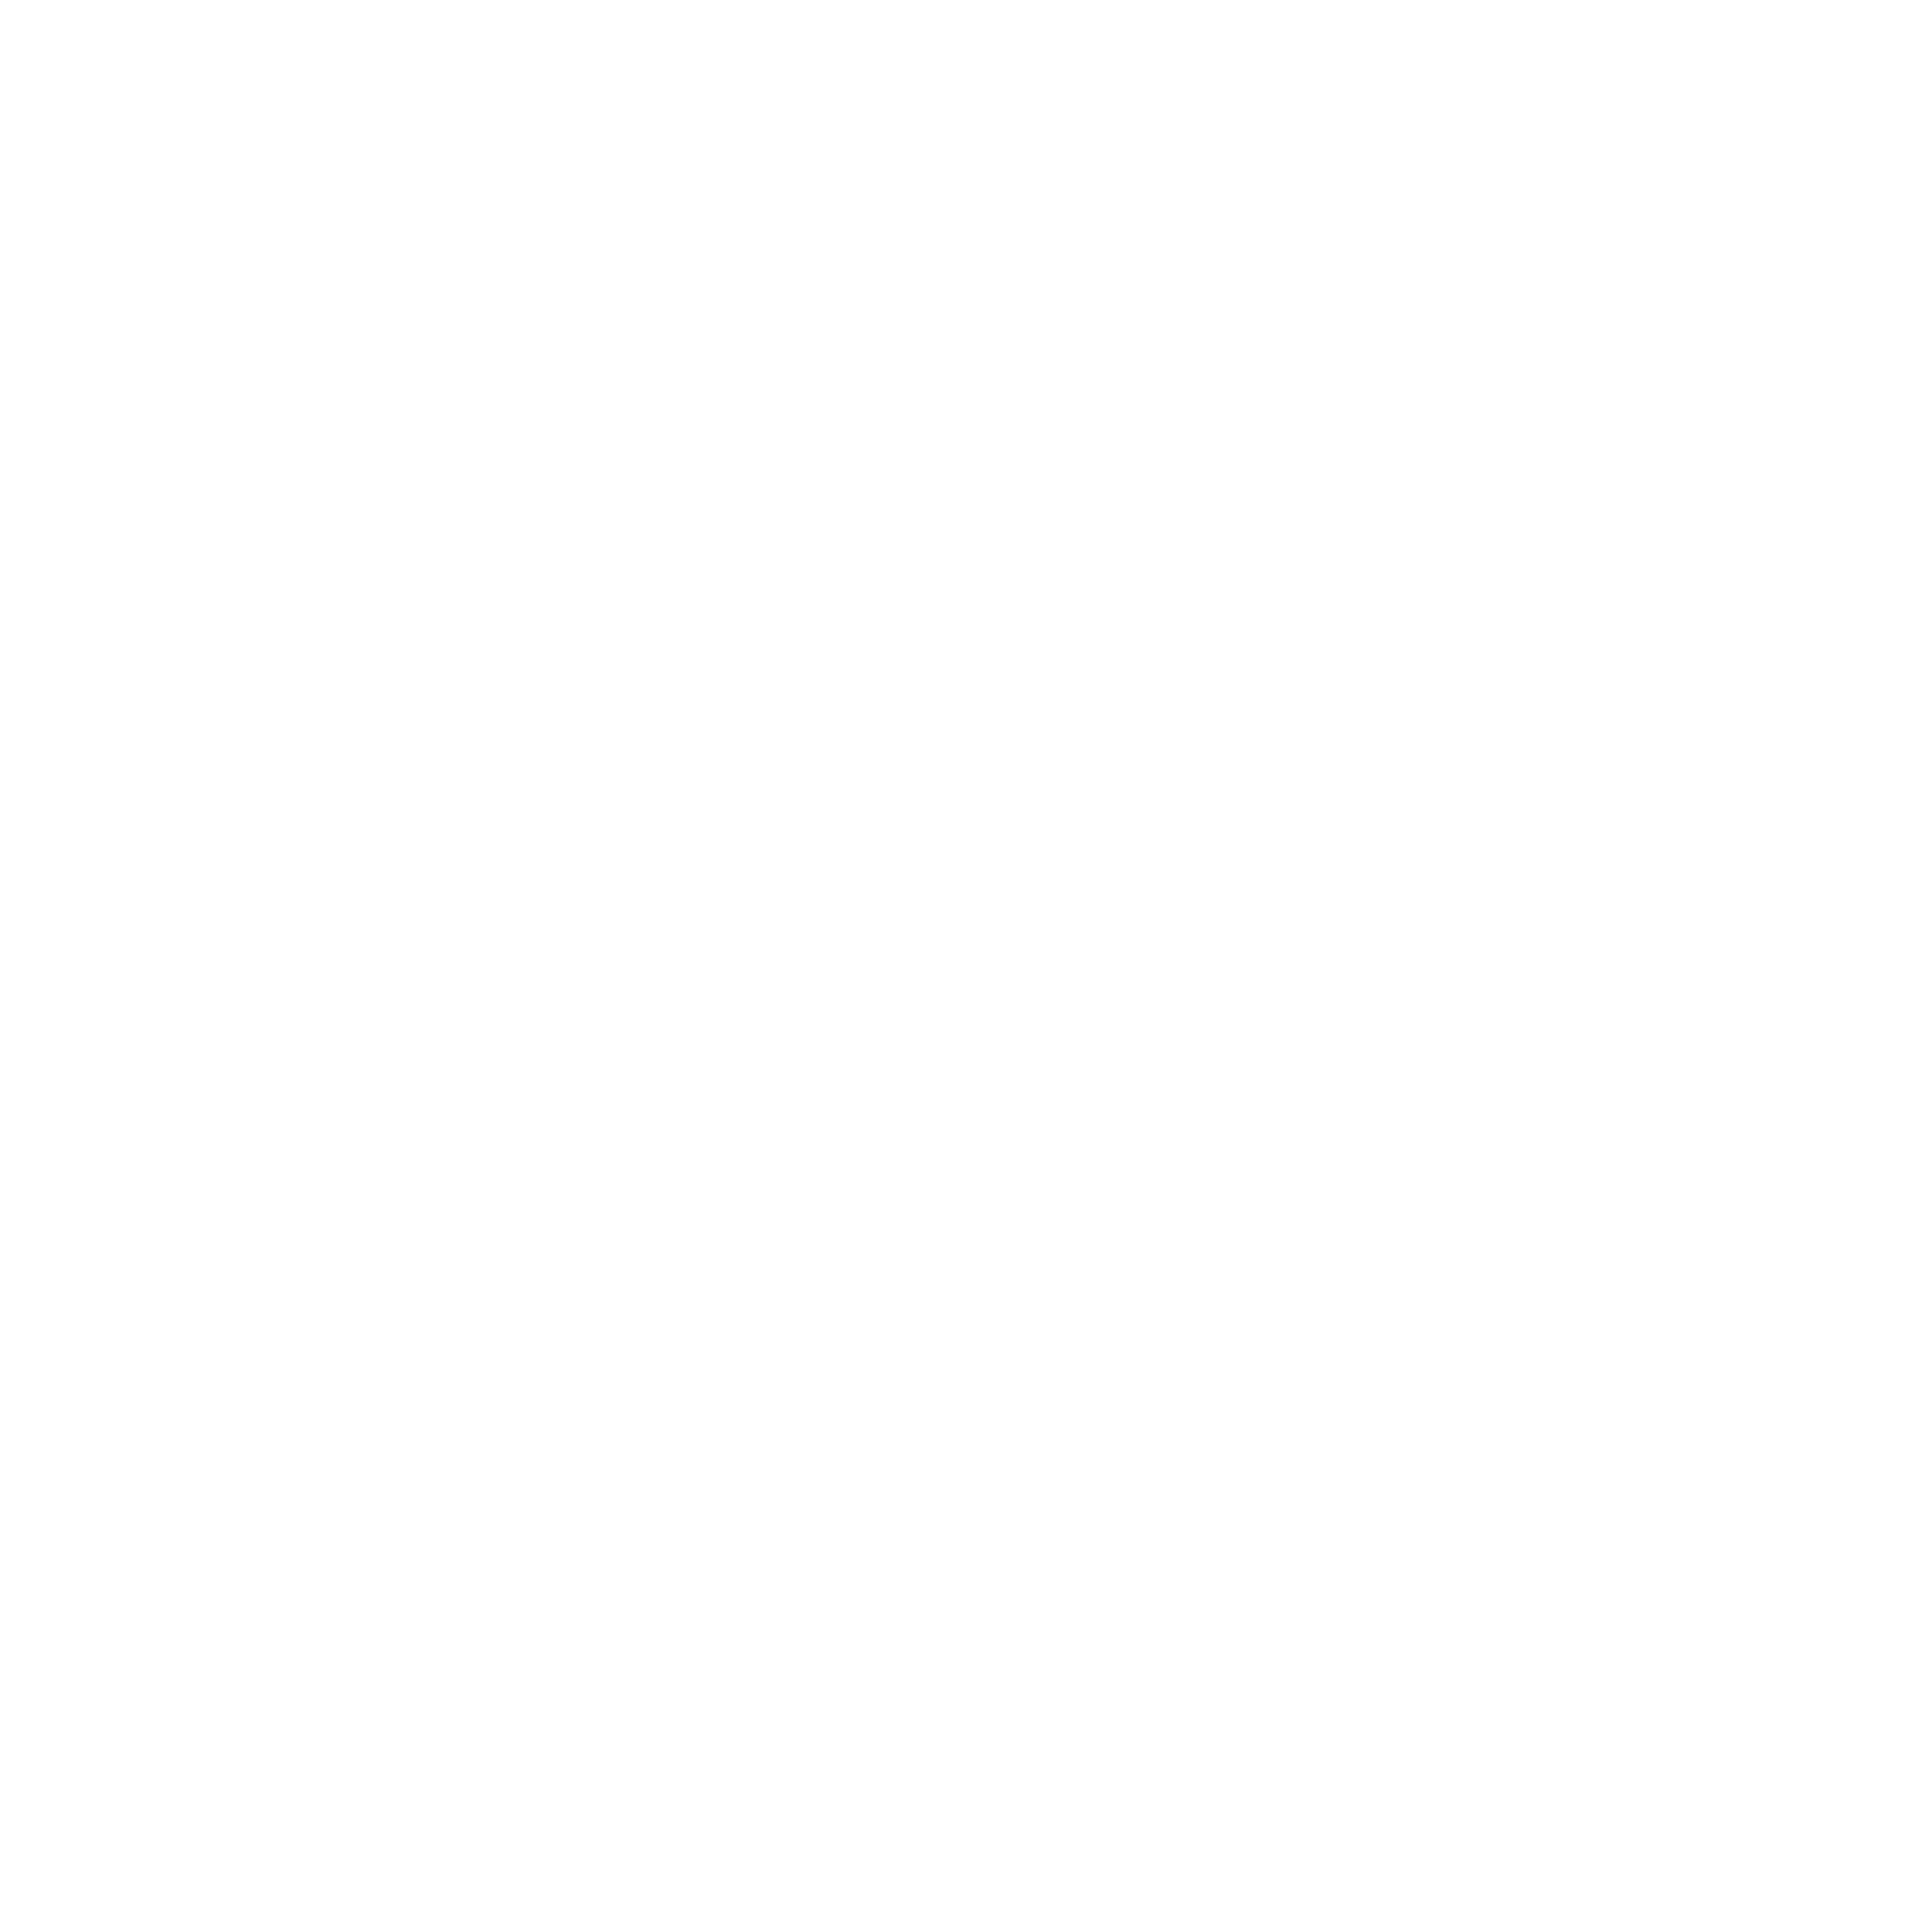 City of Altoona Department of Codes and Inspections